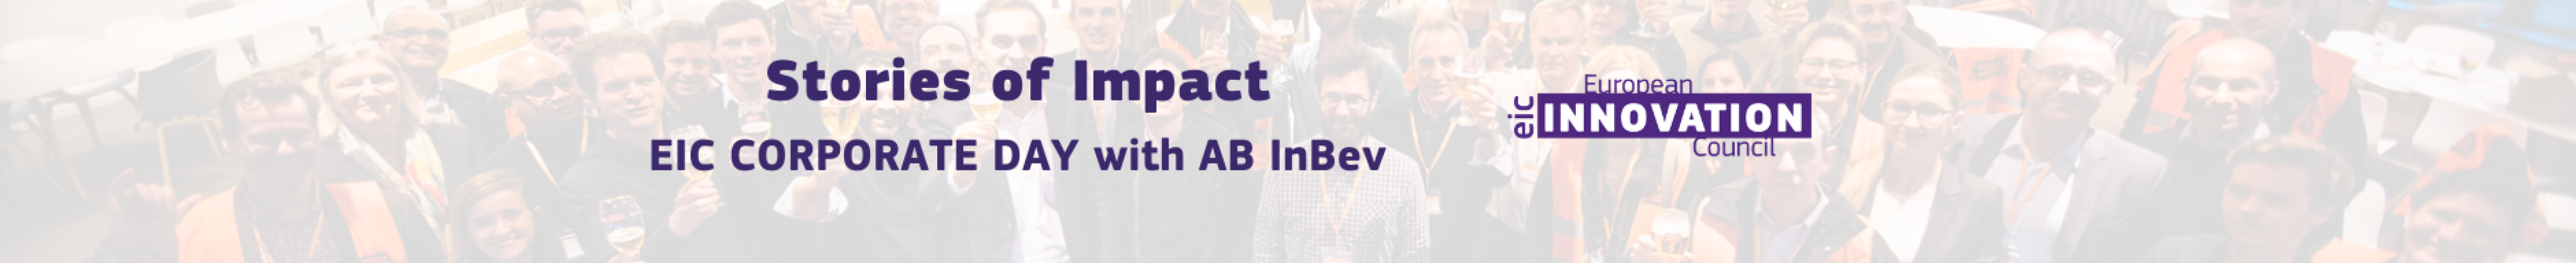 banner-stories_of_impact_-_abinbev_4.png